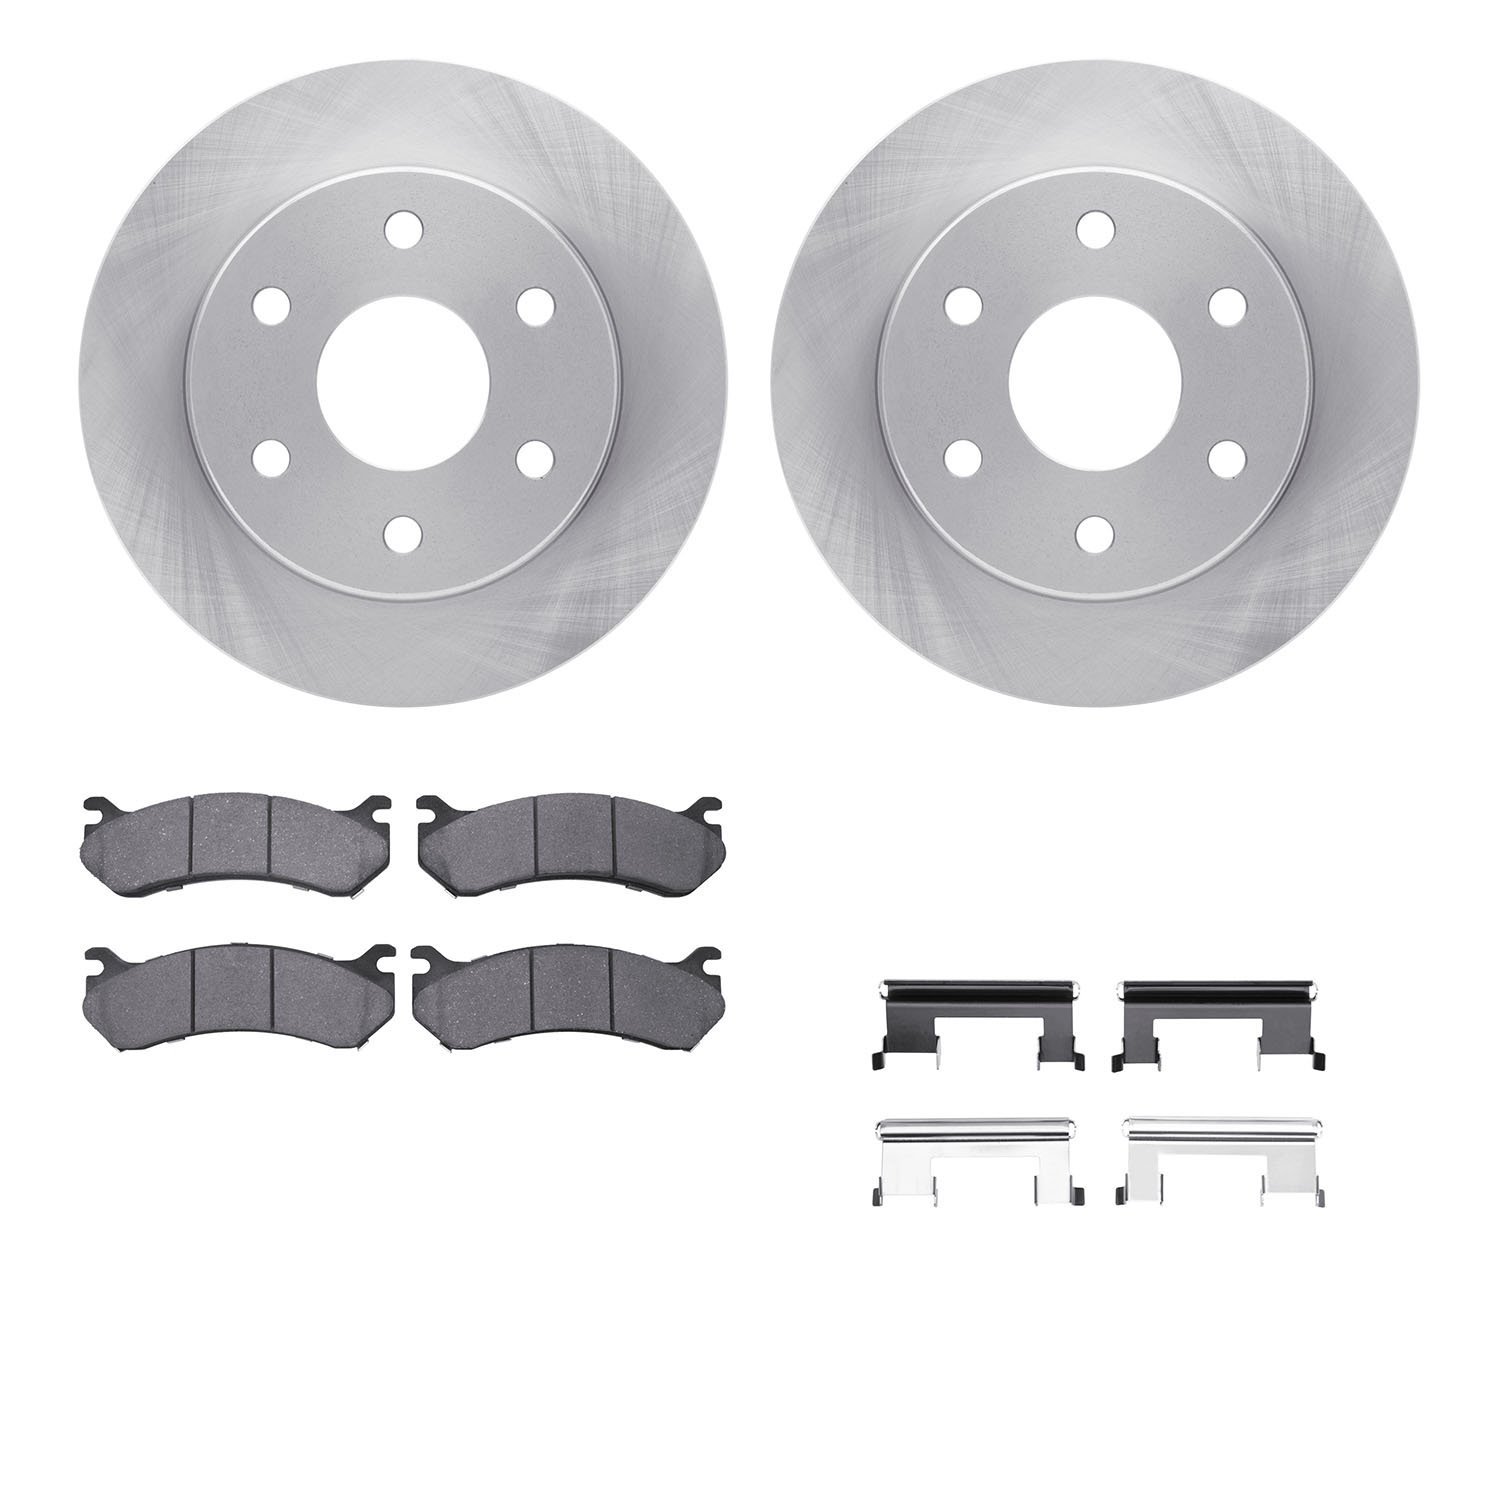 6412-48064 Brake Rotors with Ultimate-Duty Brake Pads Kit & Hardware, 1999-2008 GM, Position: Front